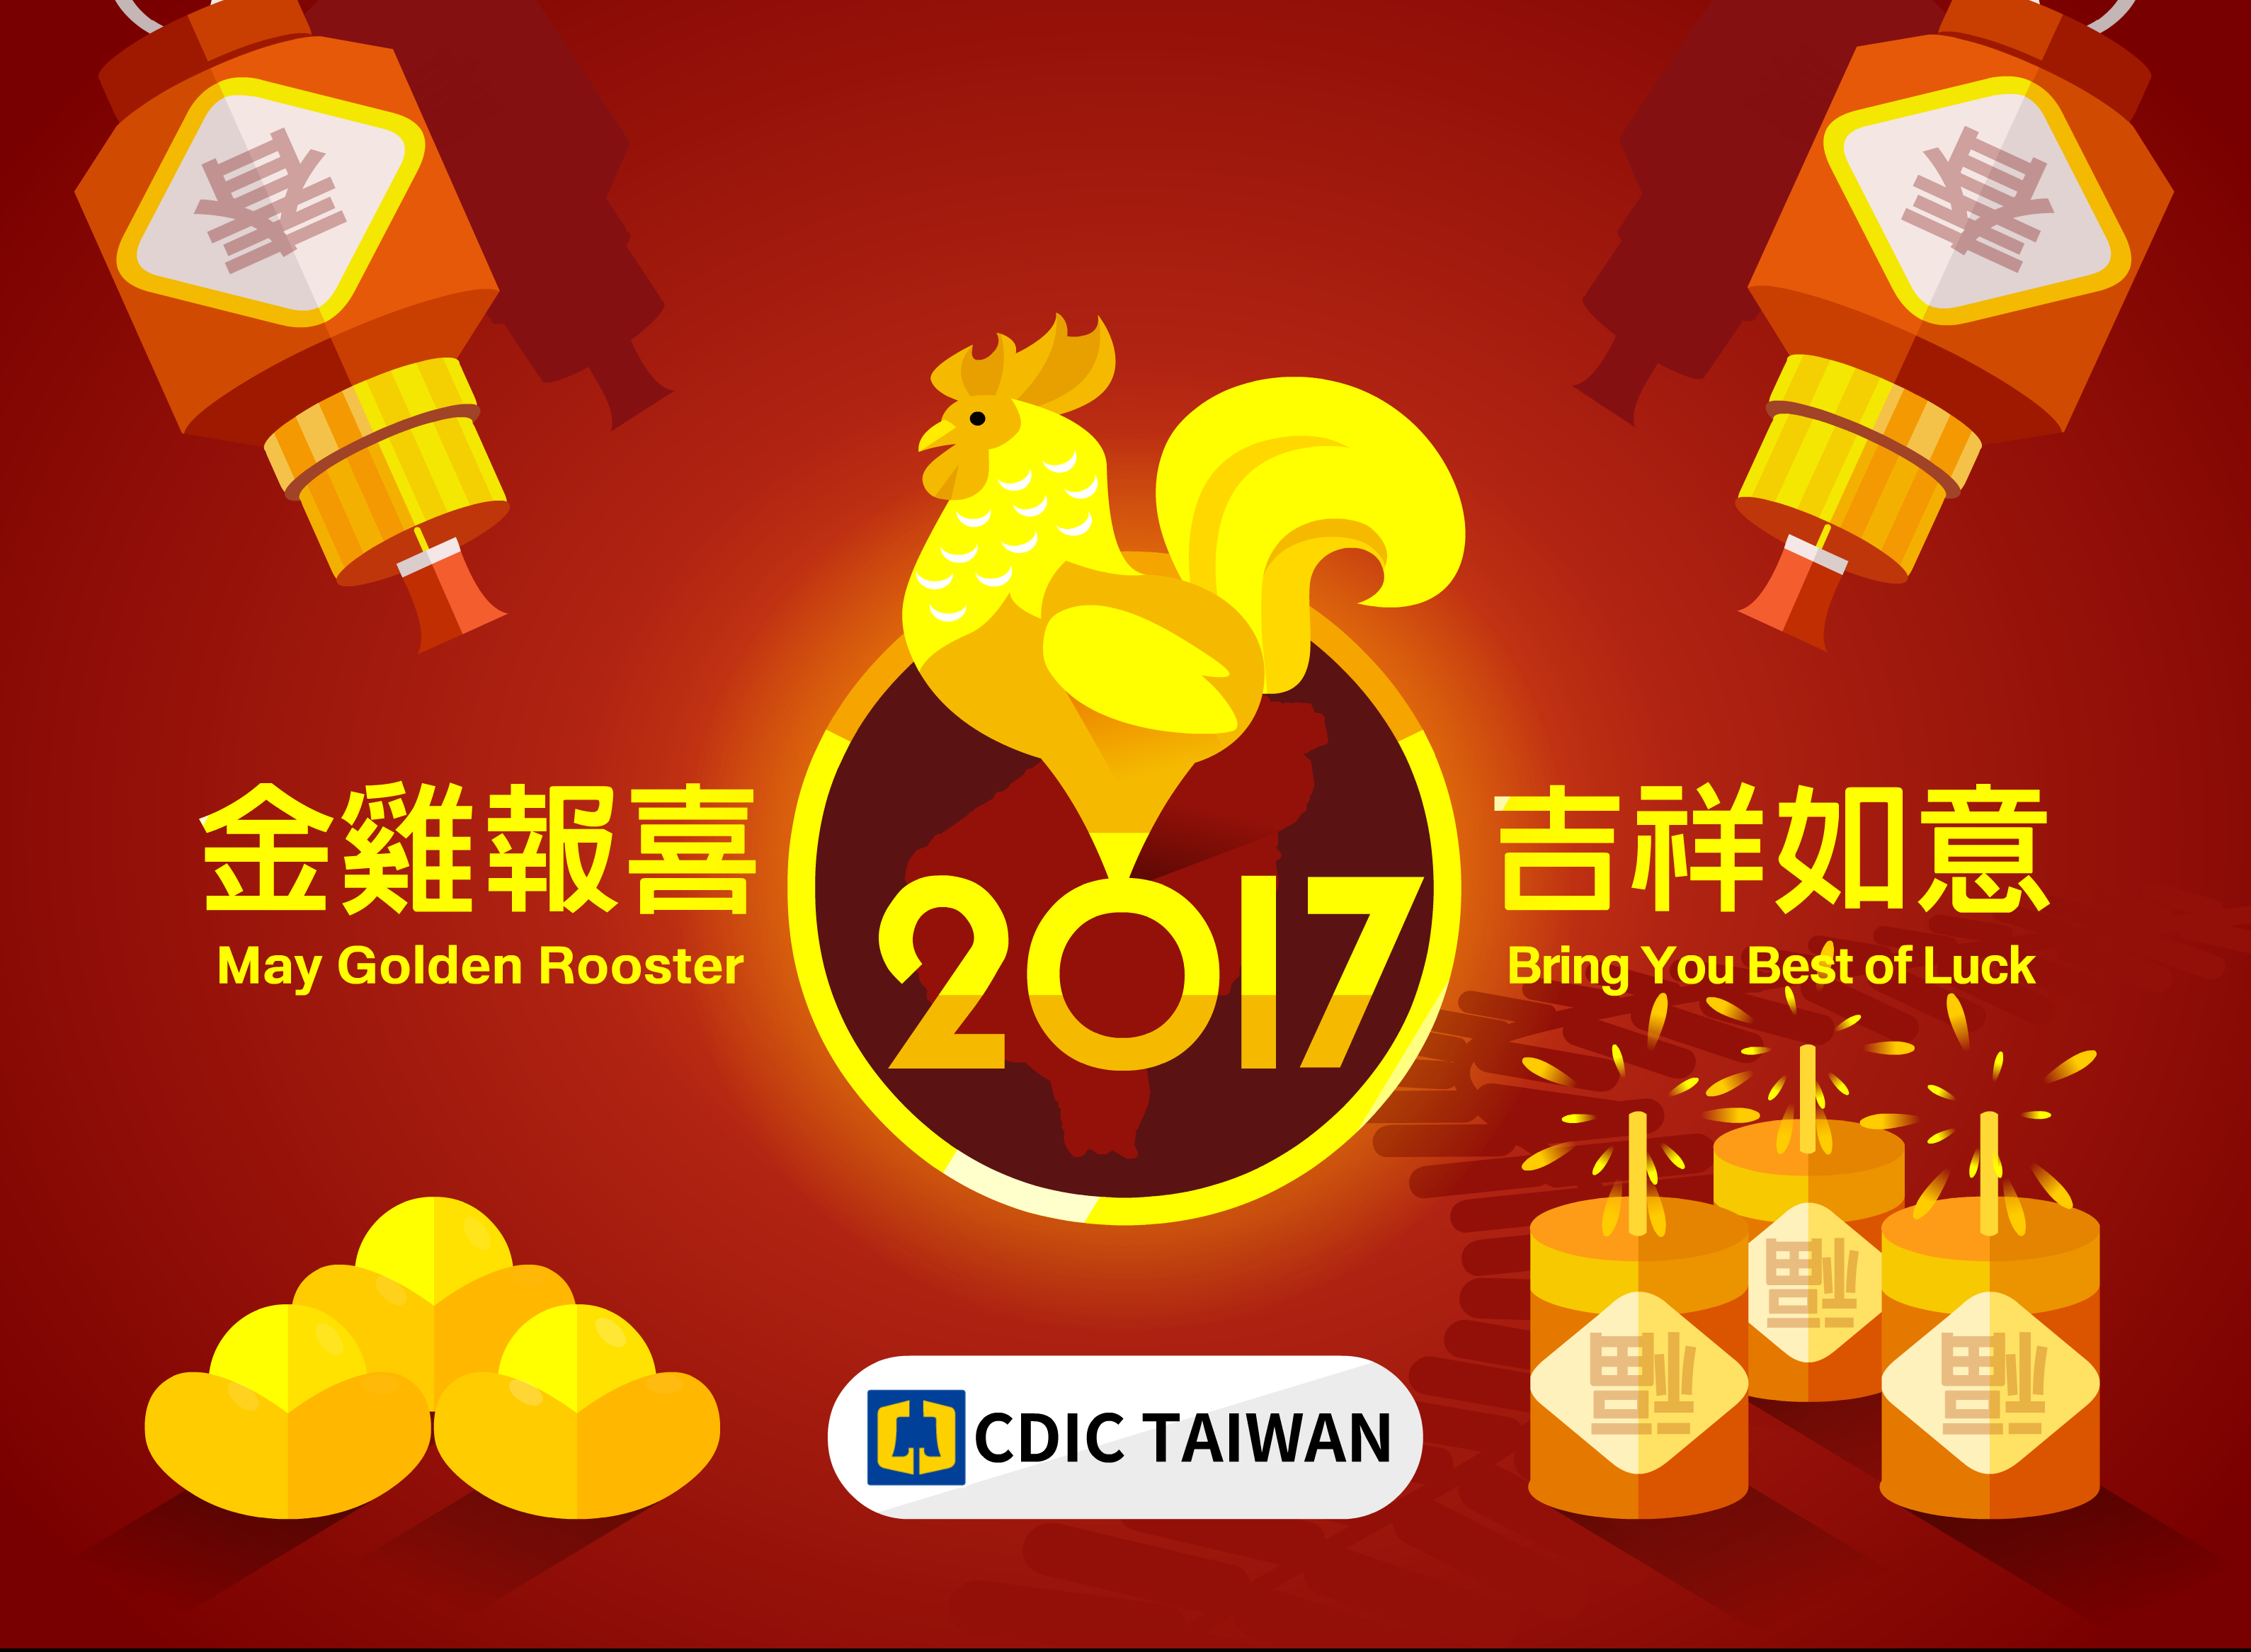 CDIC Wishes You a Happy New Year of 2017！